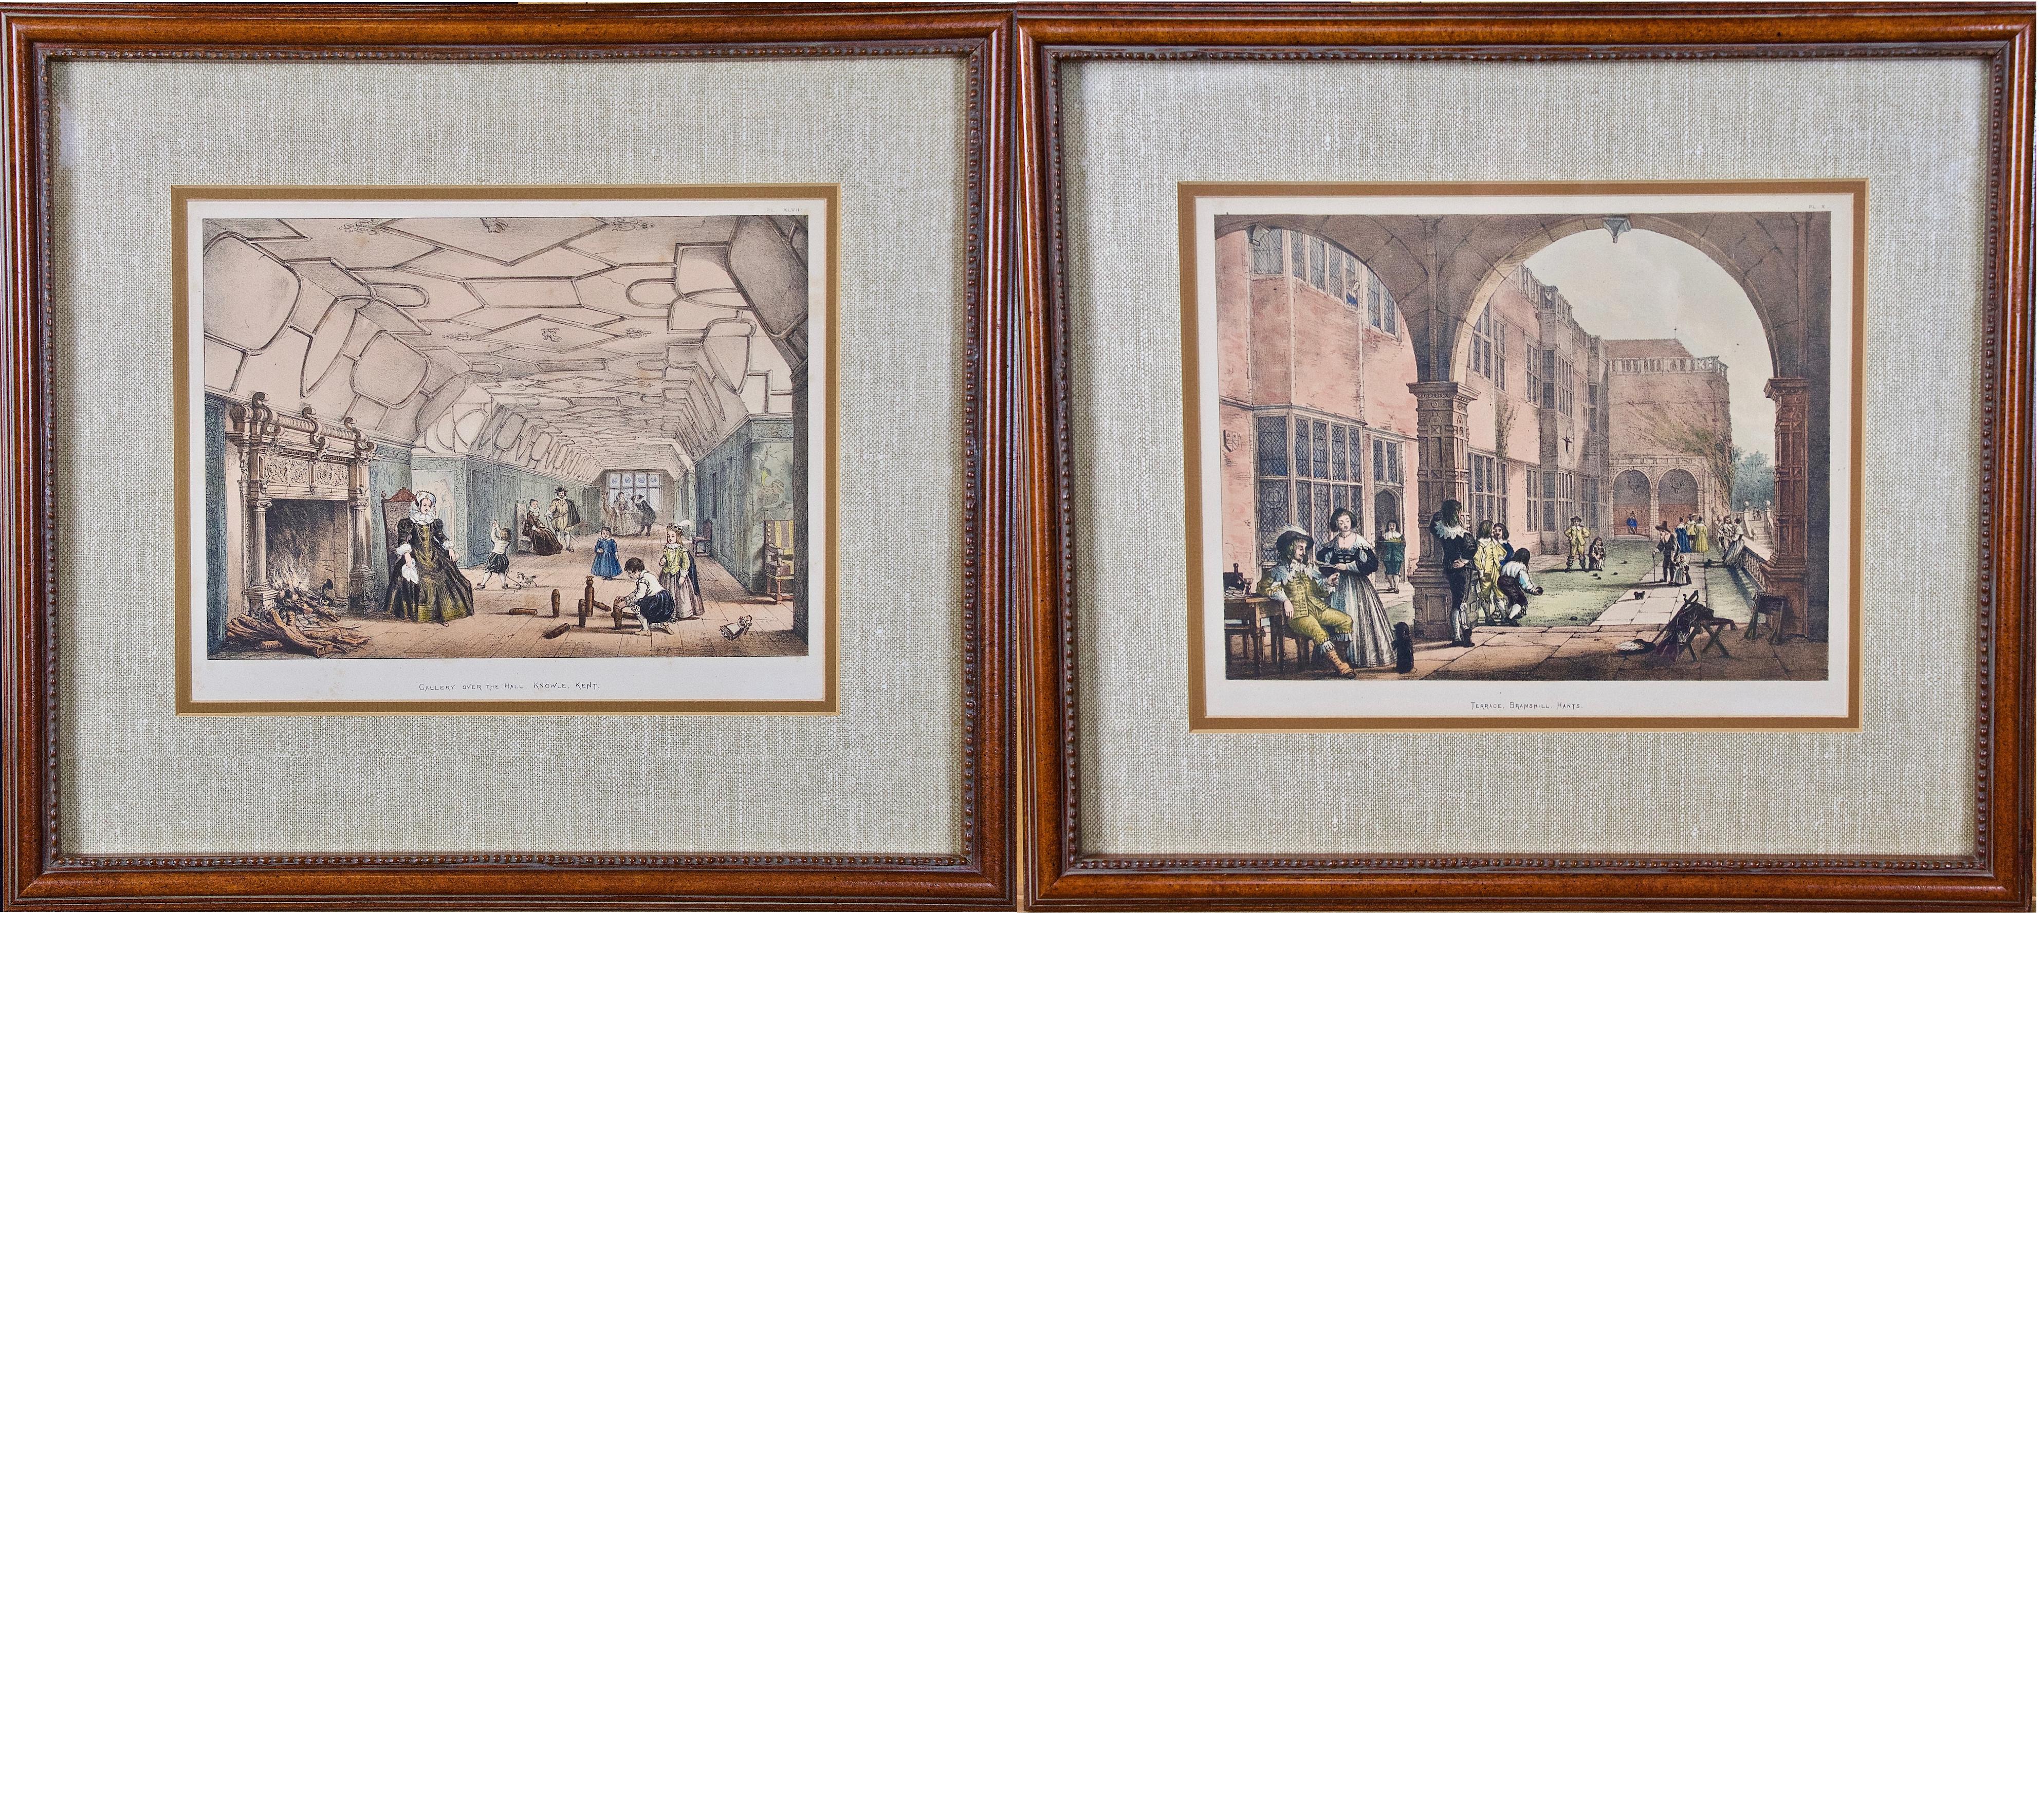 A Pair of Framed 19th Century Colored Lithographs of Tudor Scenes by Joseph Nash